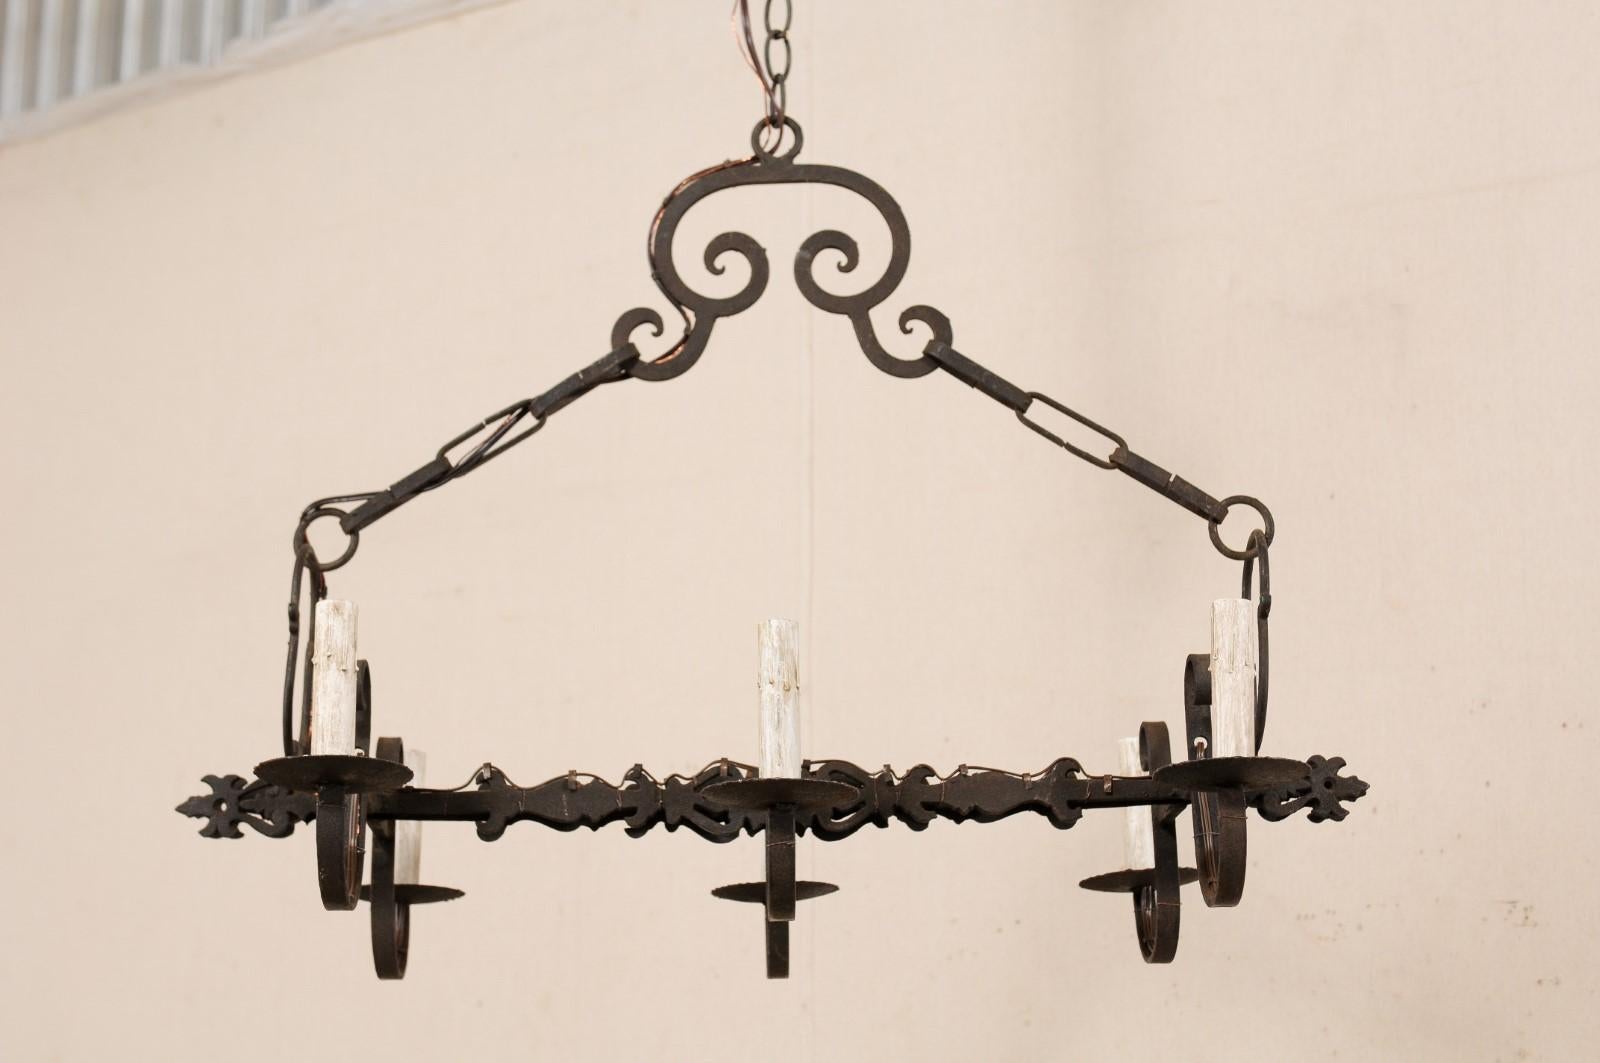 A French six-light iron chandelier from the mid-20th century. This vintage chandelier from France has an over-all rectangular-shaped appearance with a pair of horizontally set, decoratively cut and pierced iron bars making up the center, giving